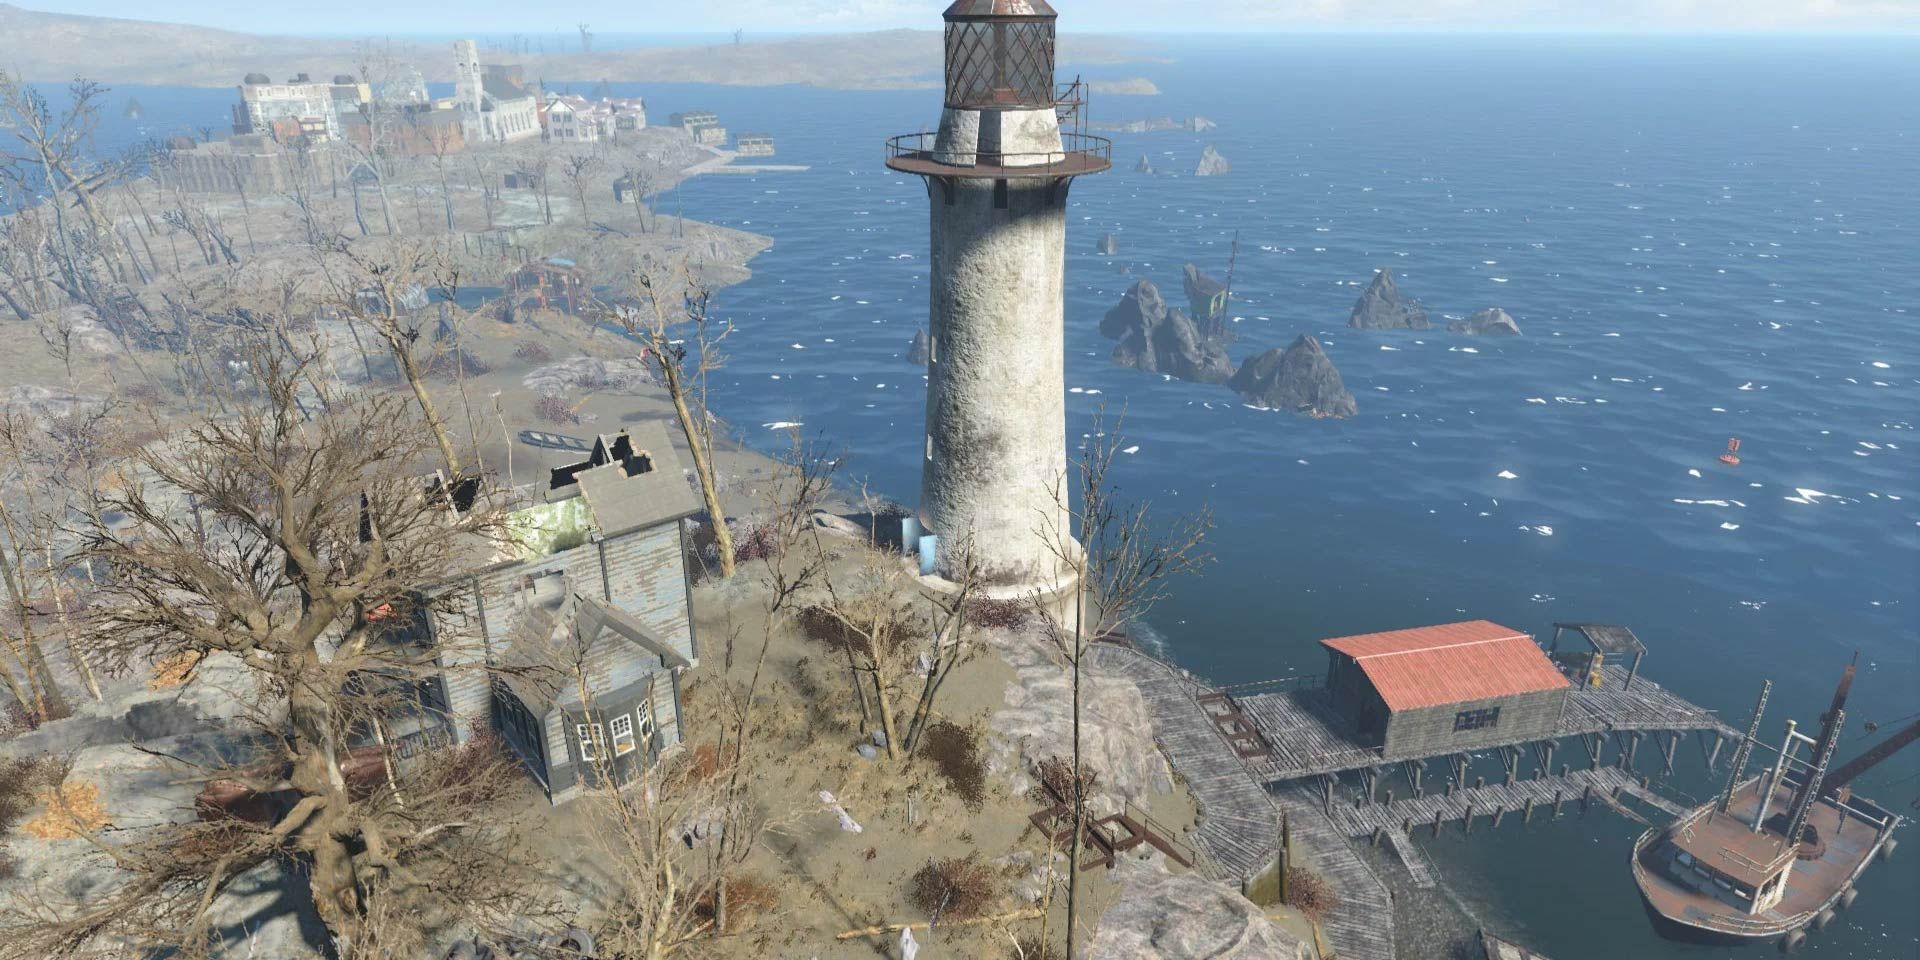 Kingsport Lighthouse in Fallout 4; a lighthouse on the coast near a small dock.